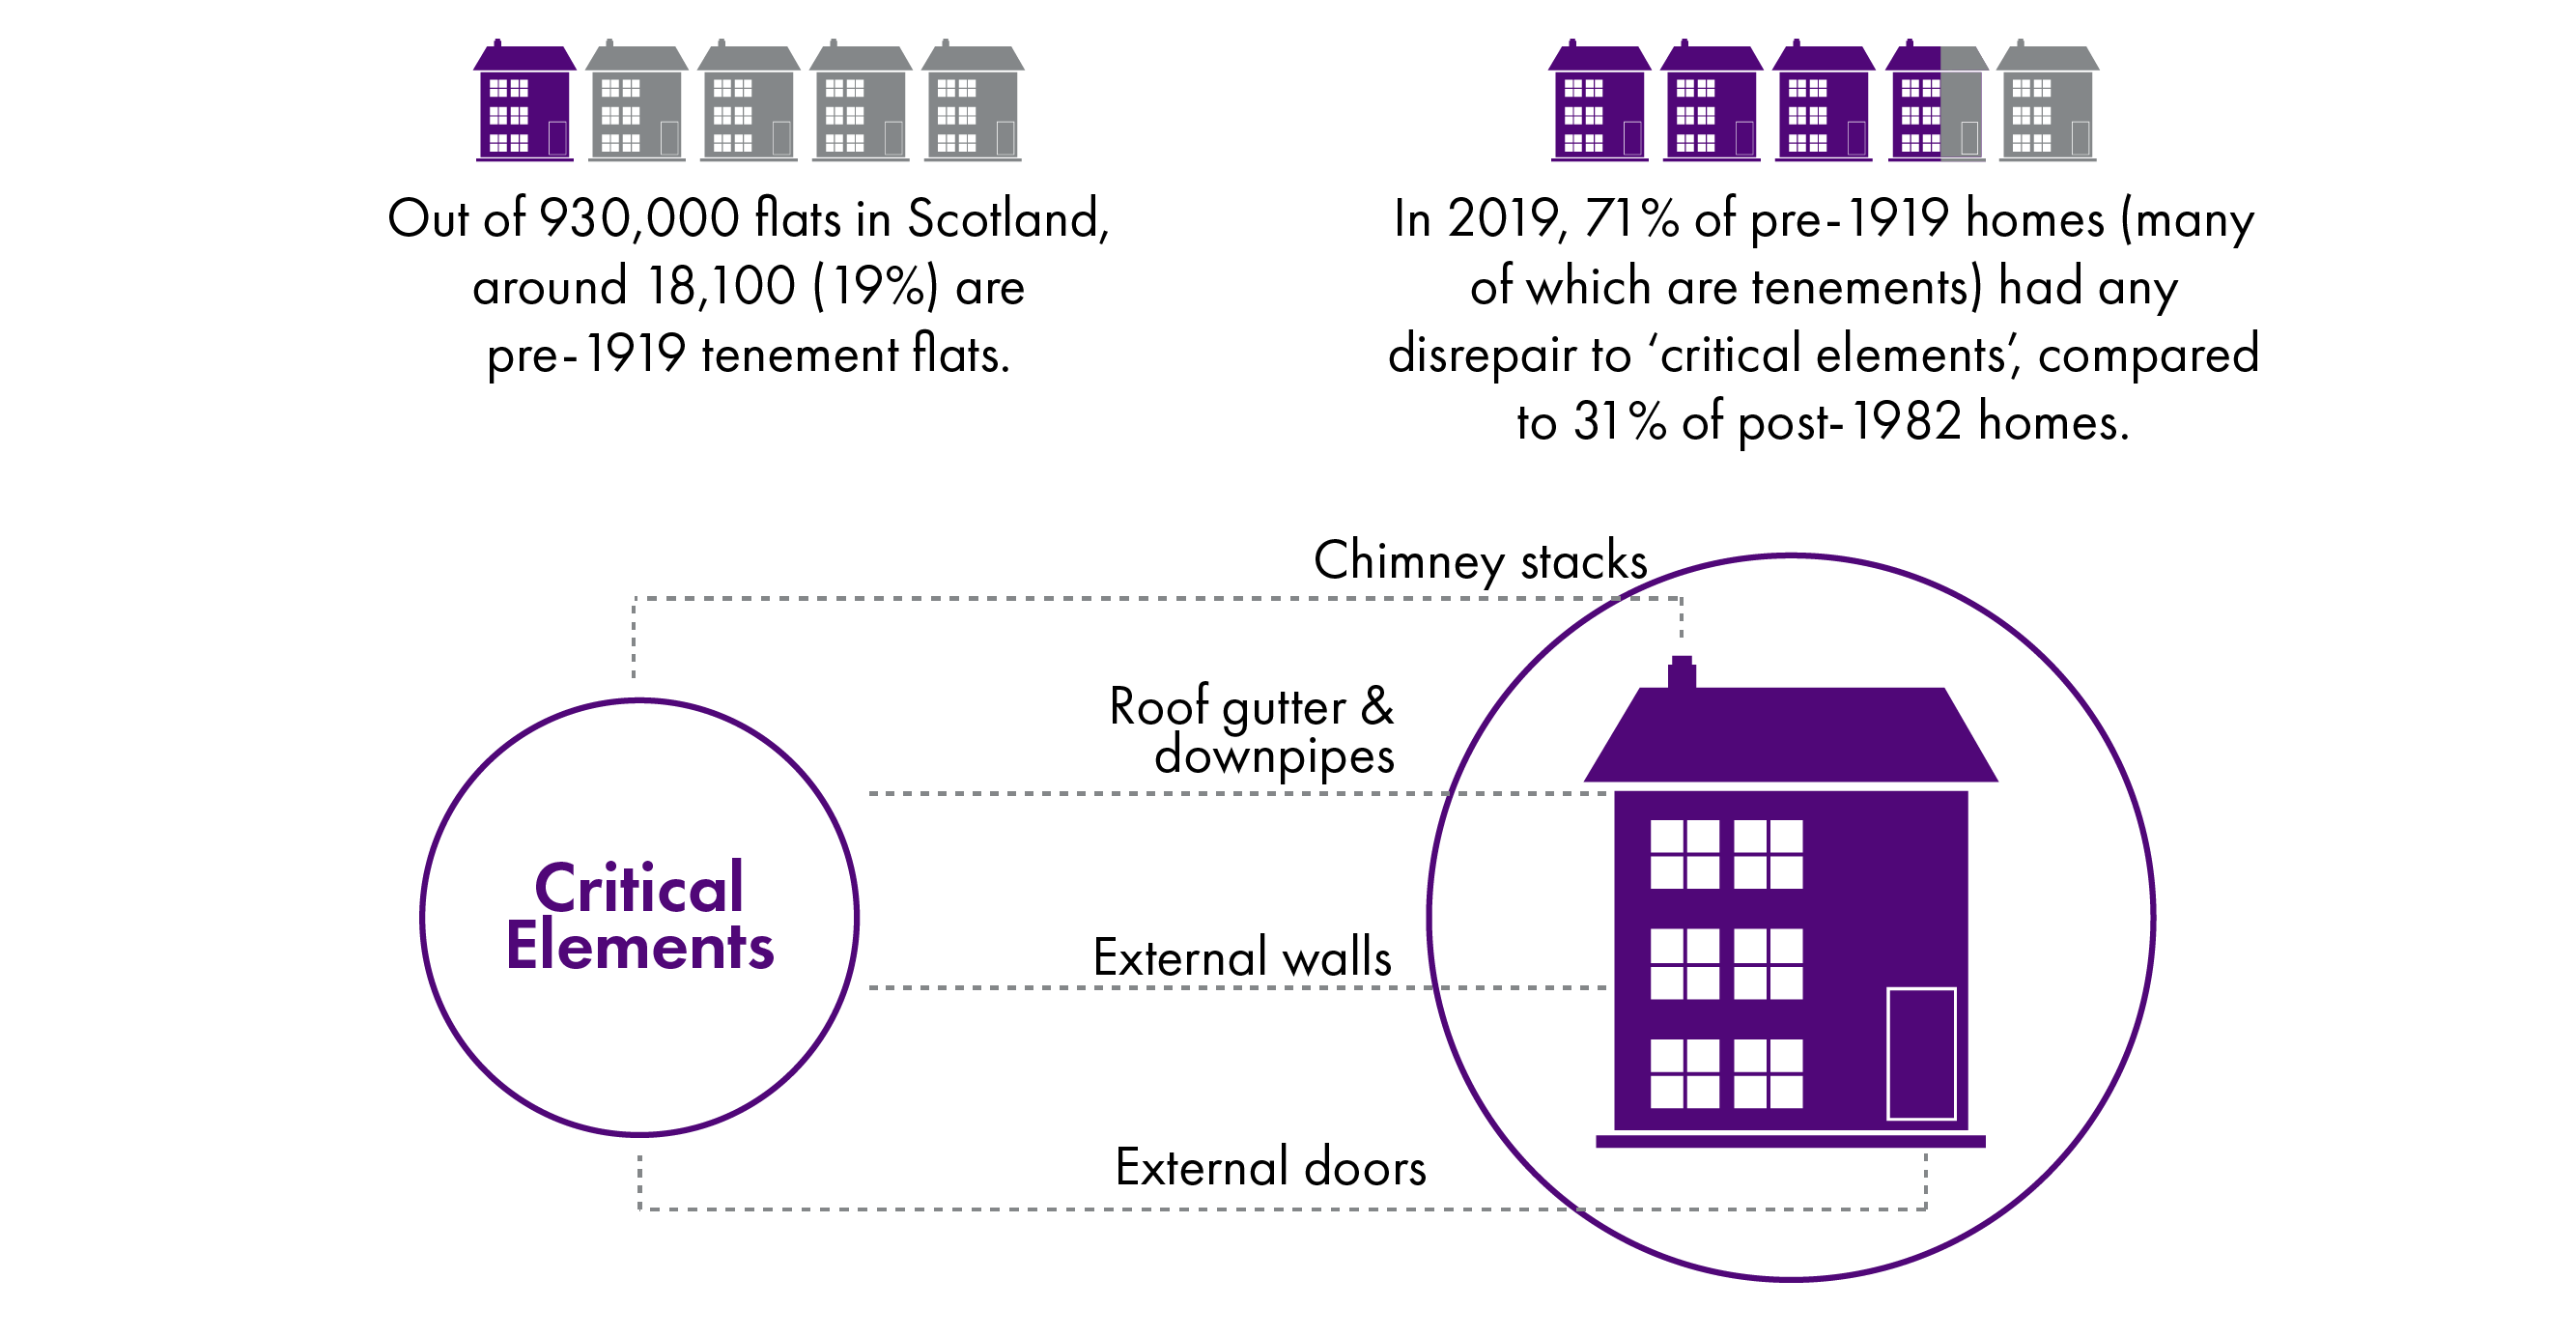 This infographic shows that 19% of flats in Scotand (18,100) are pre-1919 tenement flats. In 2018, 71% of pre-1919 homes had any disrepair to critical elements compared to 31% of post 1982 homes.